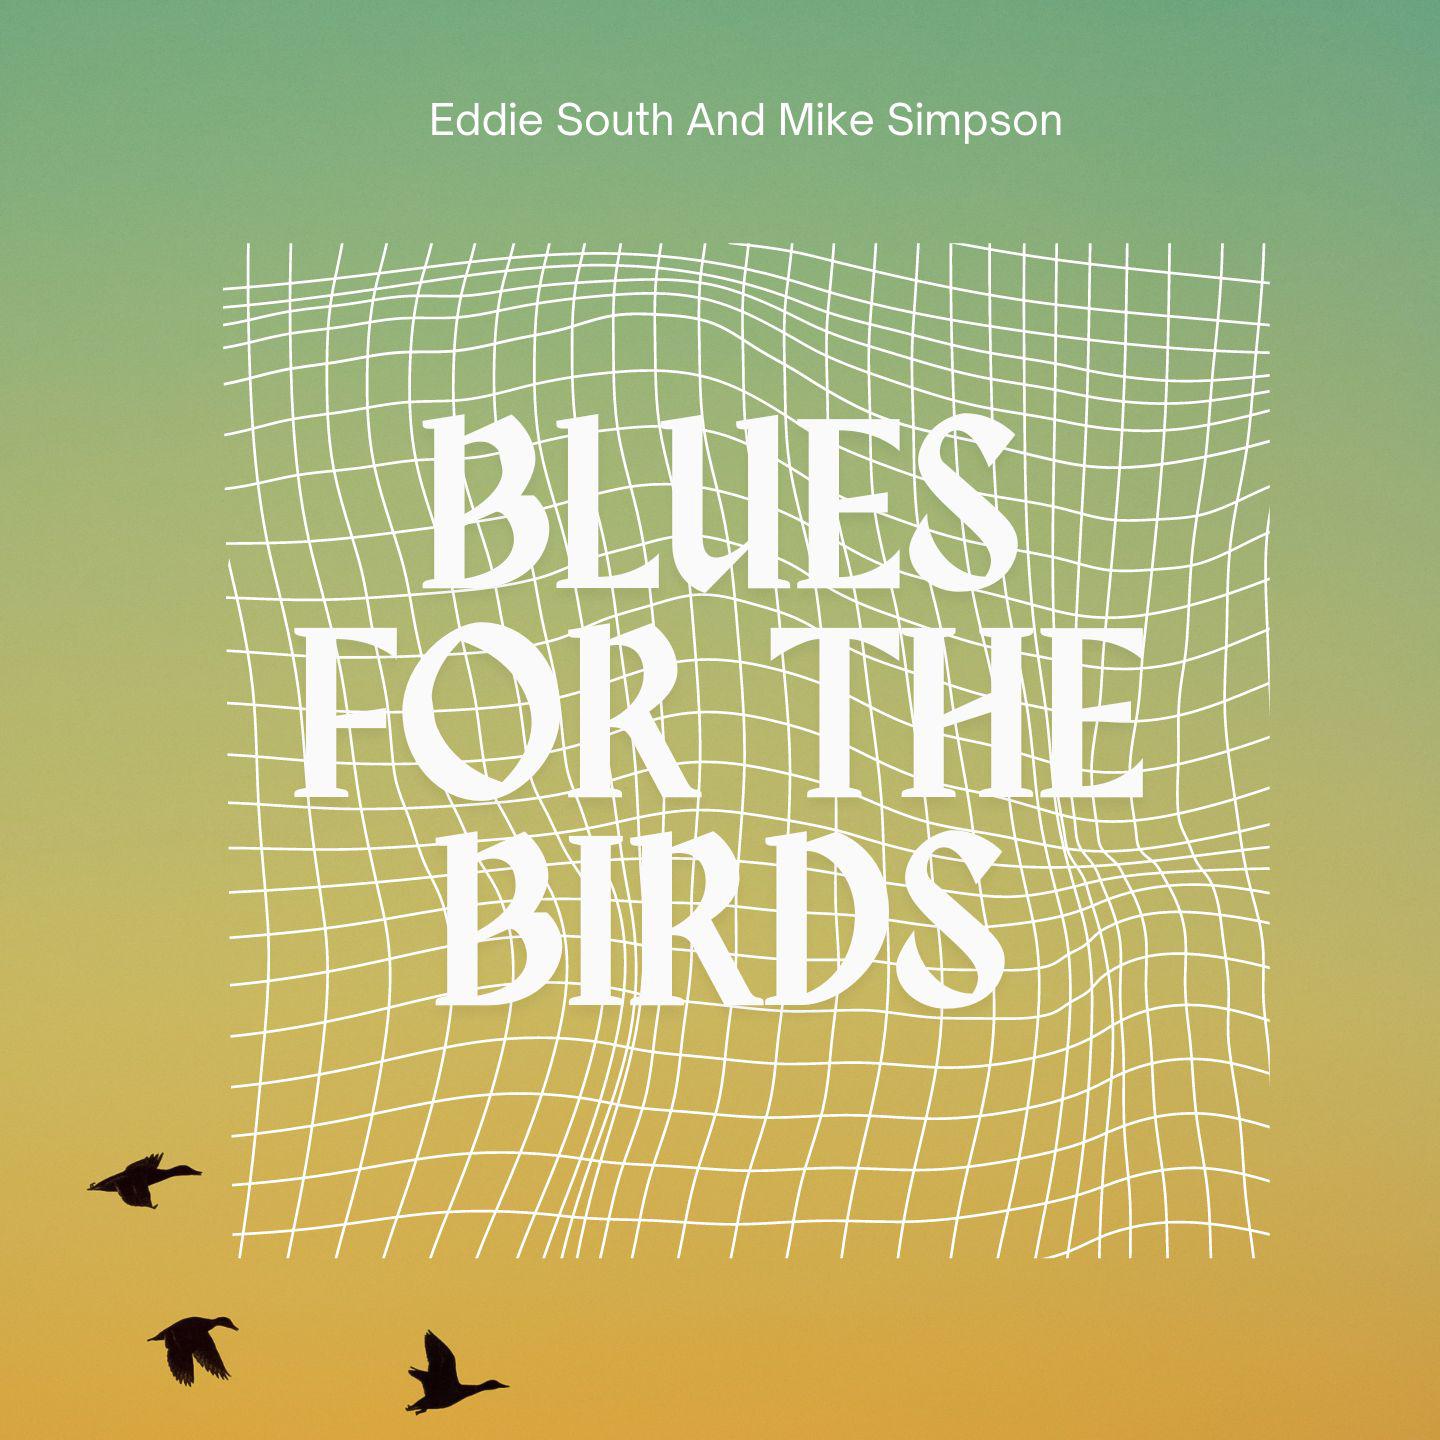 Eddie South - Blues for the birds